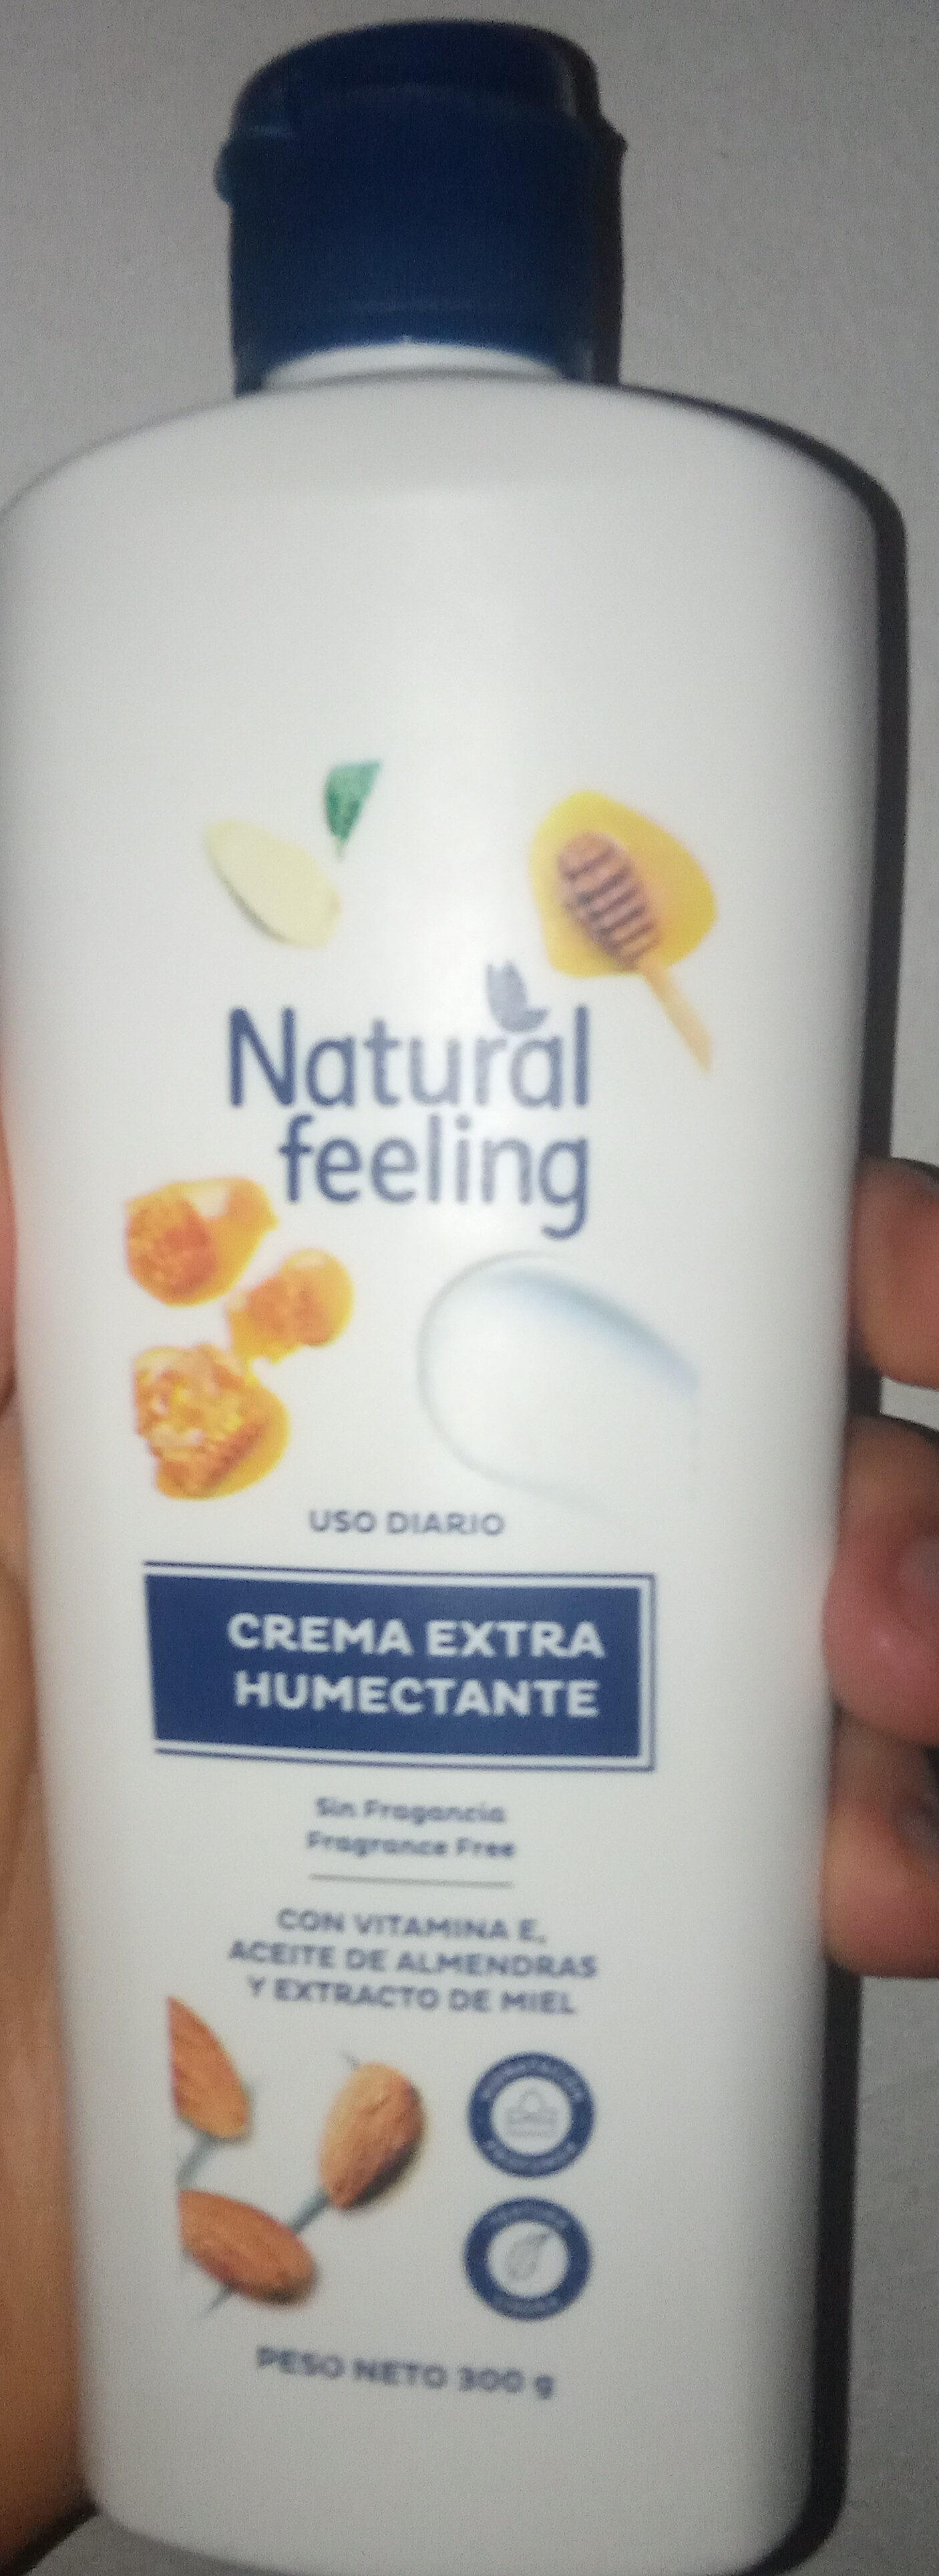 Natural Feeling | Crema Extra Humectante - 製品 - es